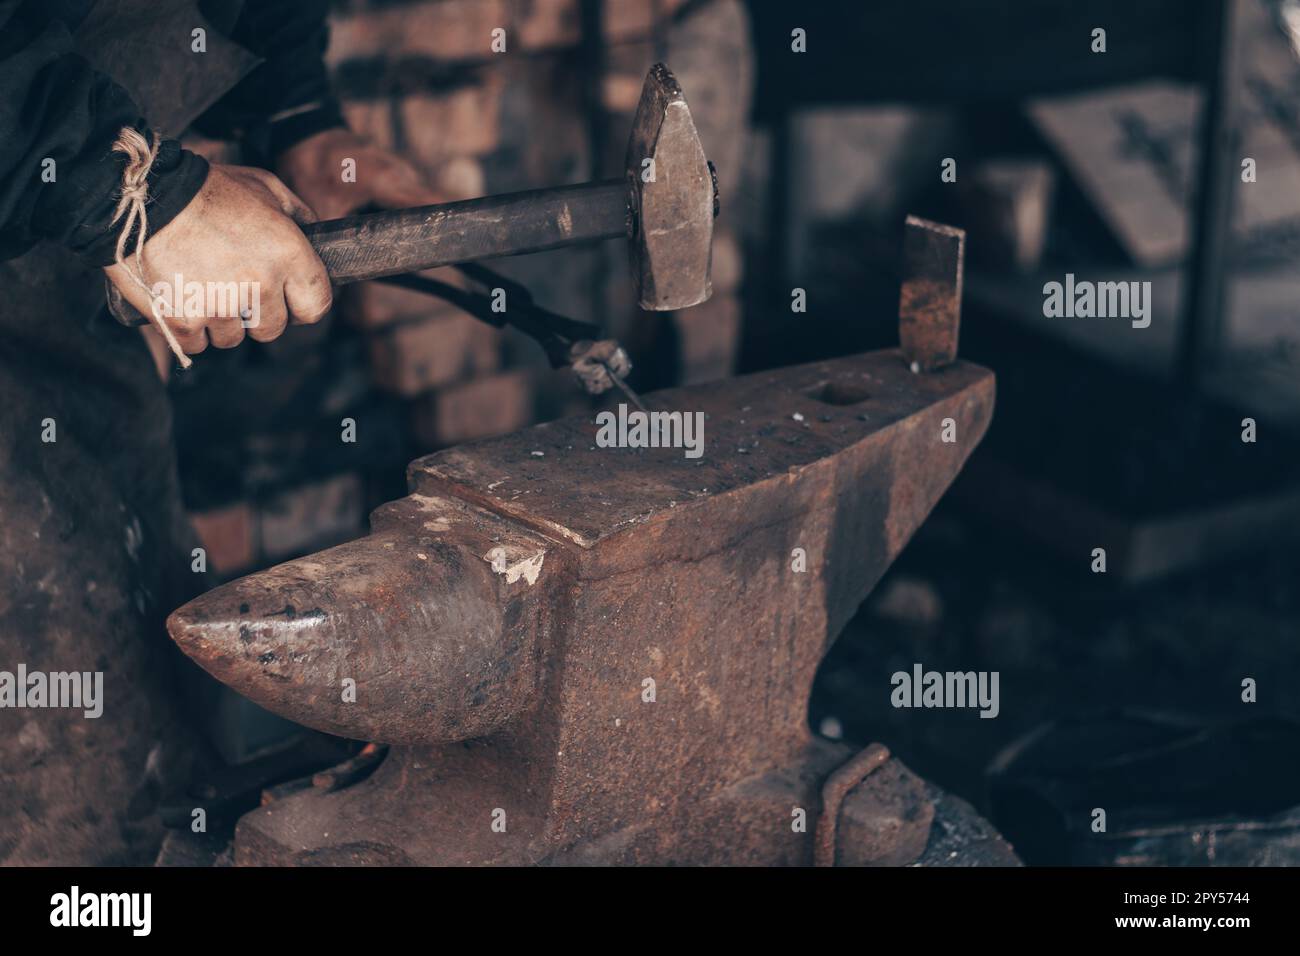 Blacksmith working metal with hammer and pincers on anvil in forge. Farrier strike iron in workshop. Metalworking. Stock Photo